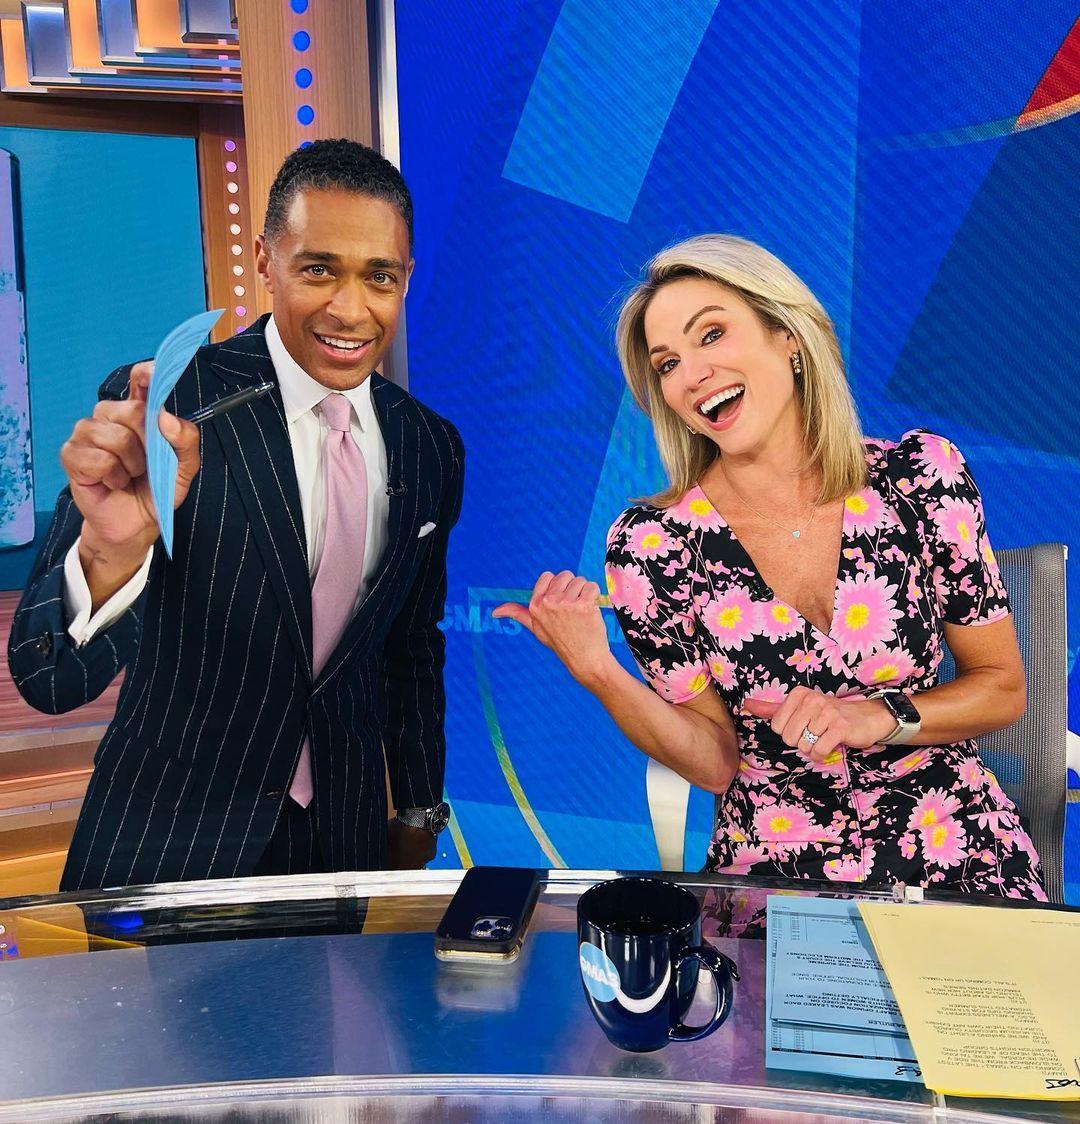 Amy Robach smiling with T.J. Holmes